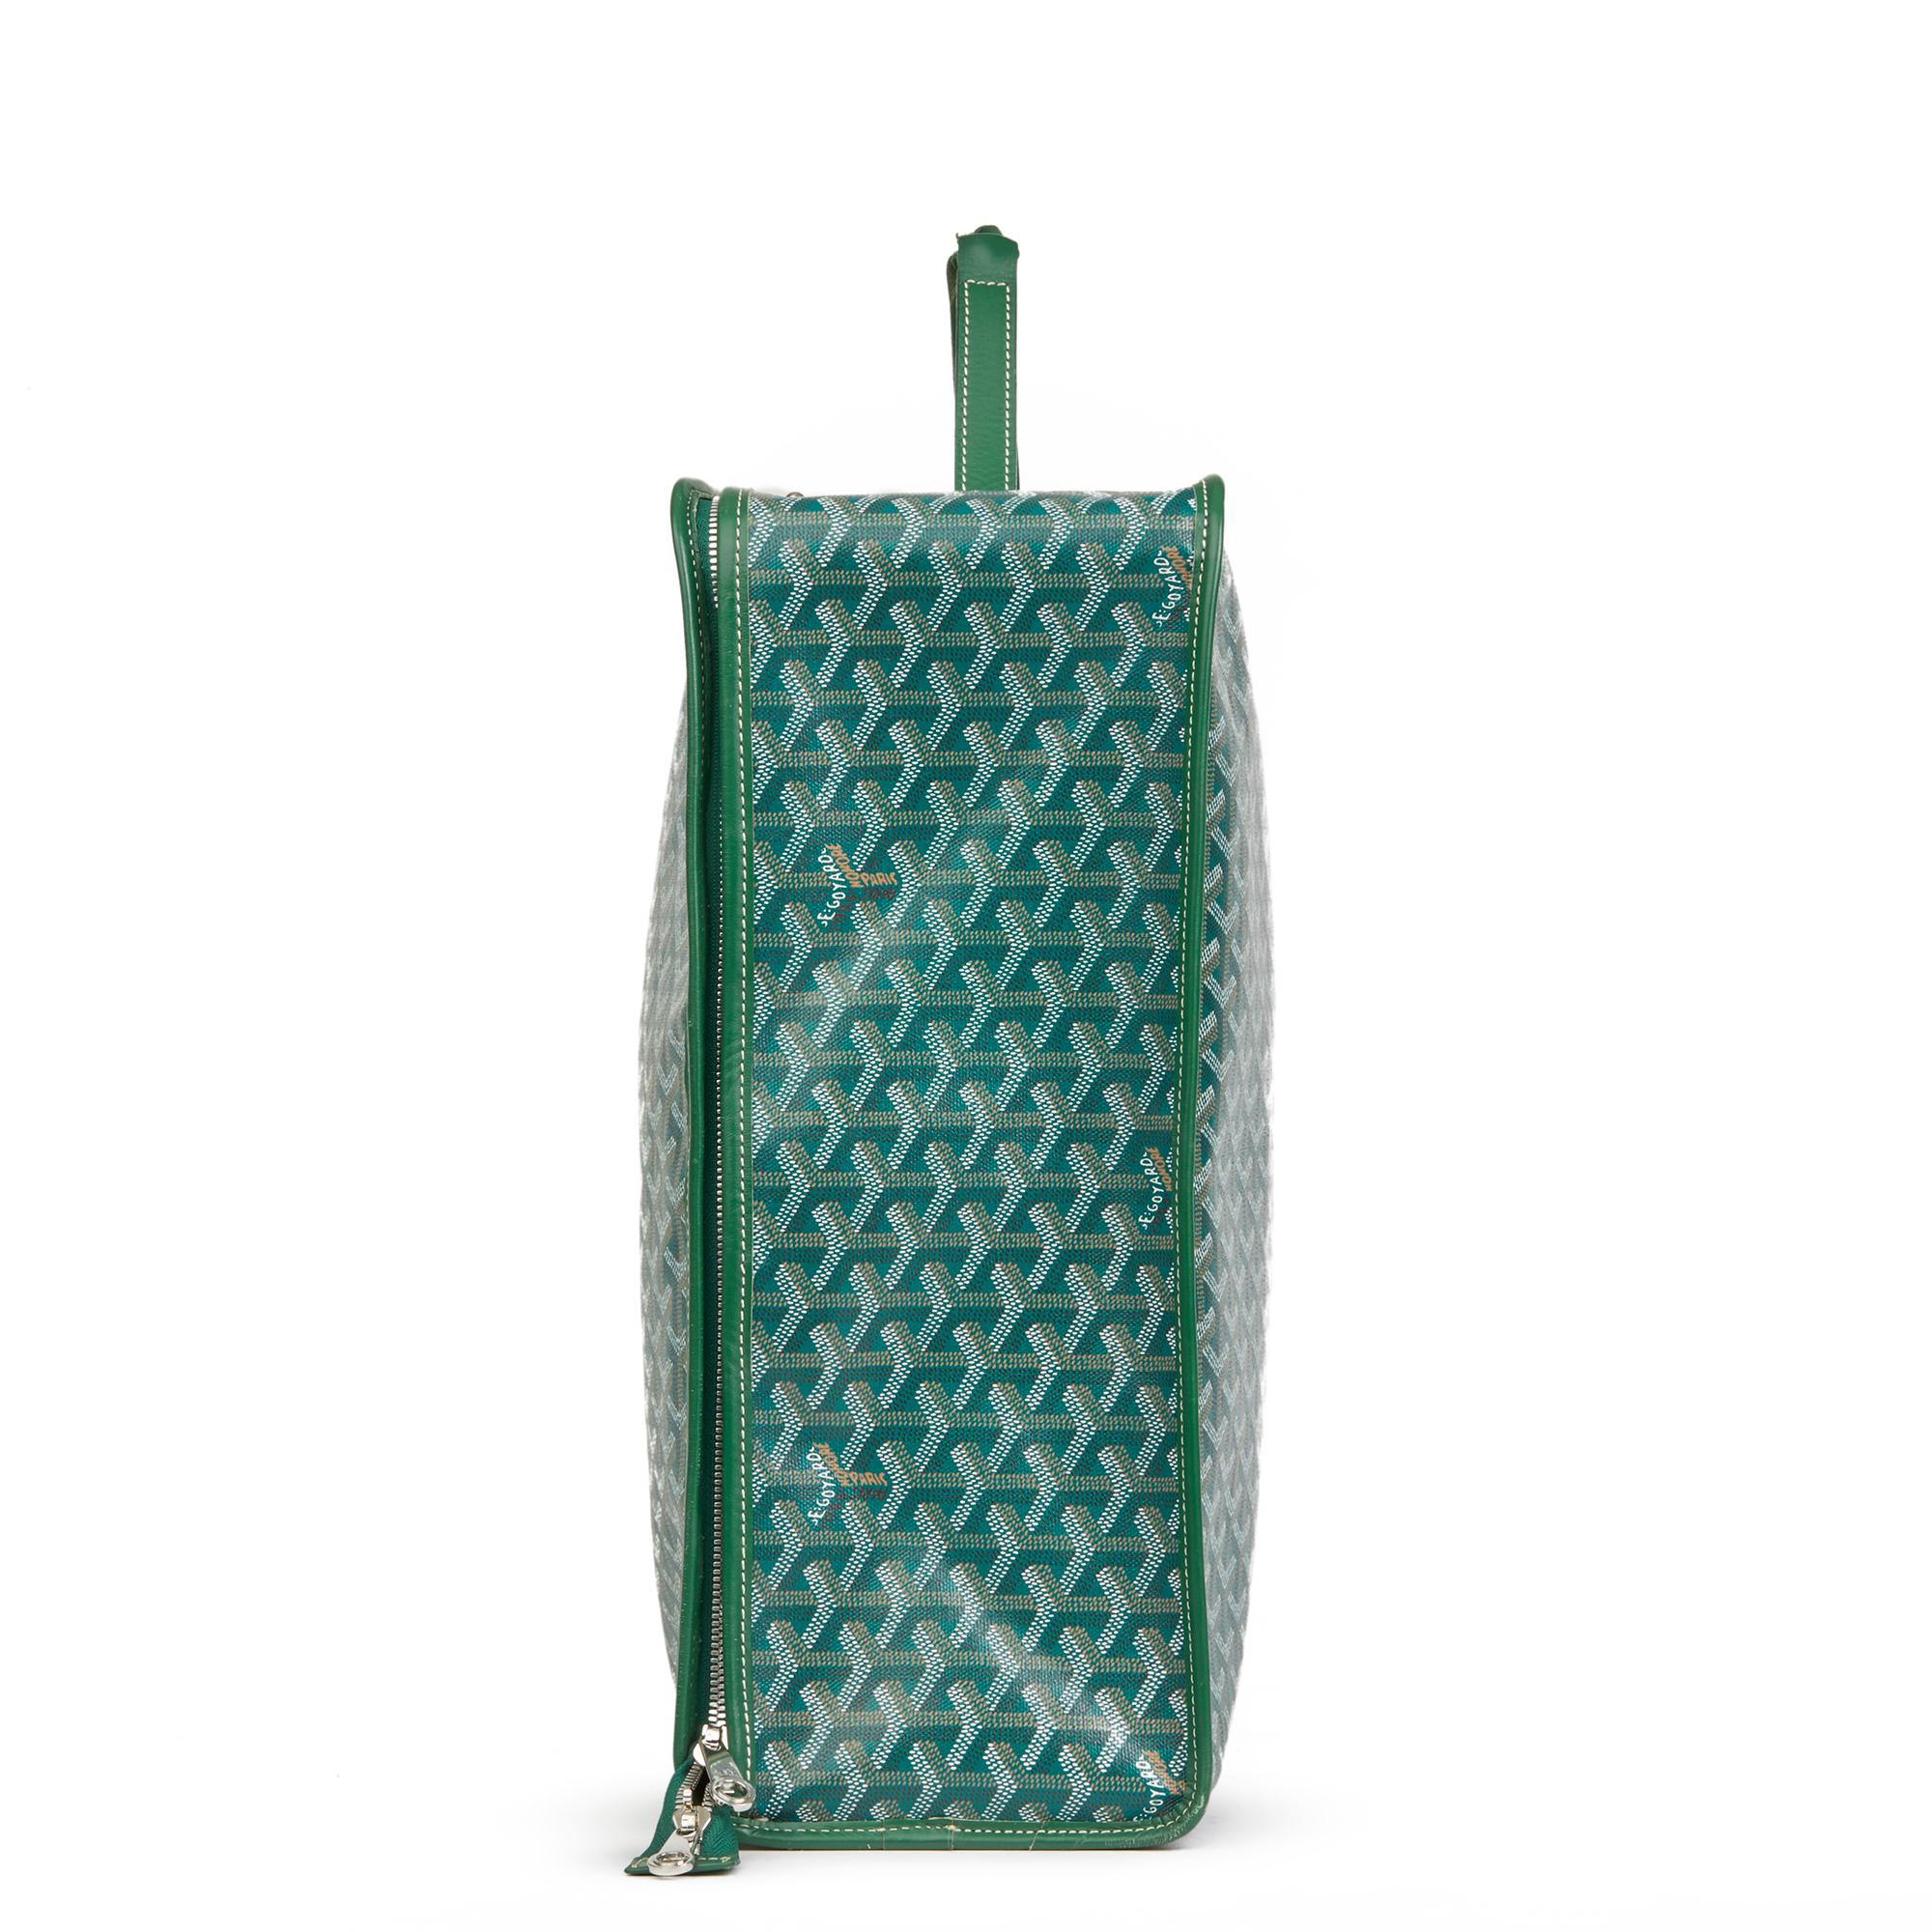 GOYARD
Green Chevron Coated Canvas Fold-Away Caravelle 60

Reference: HB2554
Serial Number: ATN 120112
Age (Circa): 2010
Authenticity Details: Serial Stamp (Made in France)
Gender: Unisex
Type: Travel

Colour: Green
Hardware: Silver 
Material(s):